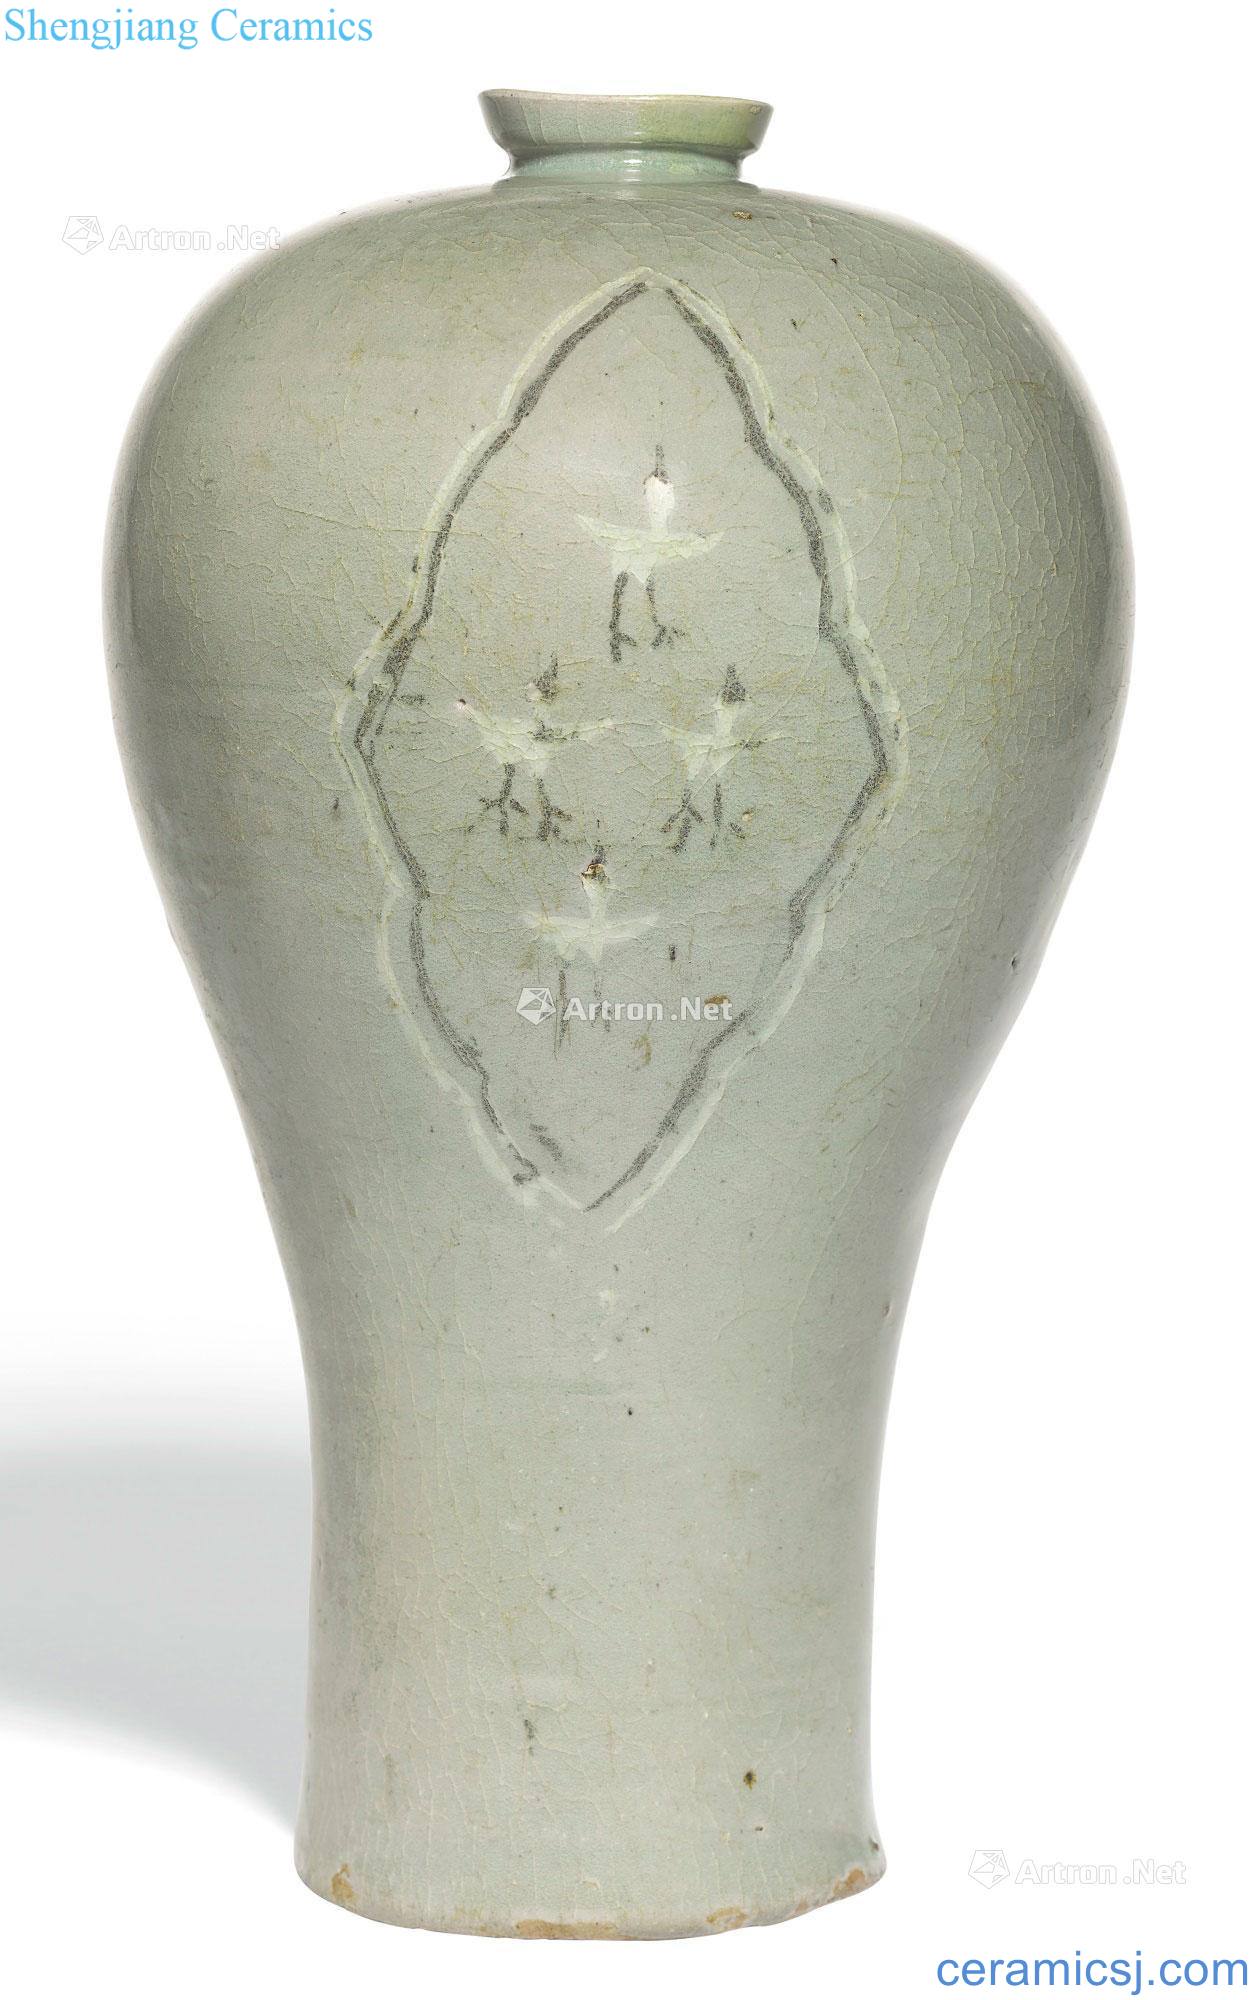 The 13th/14th century koryo dynasty As embedded celadon medallion of flowers and birds may bottle